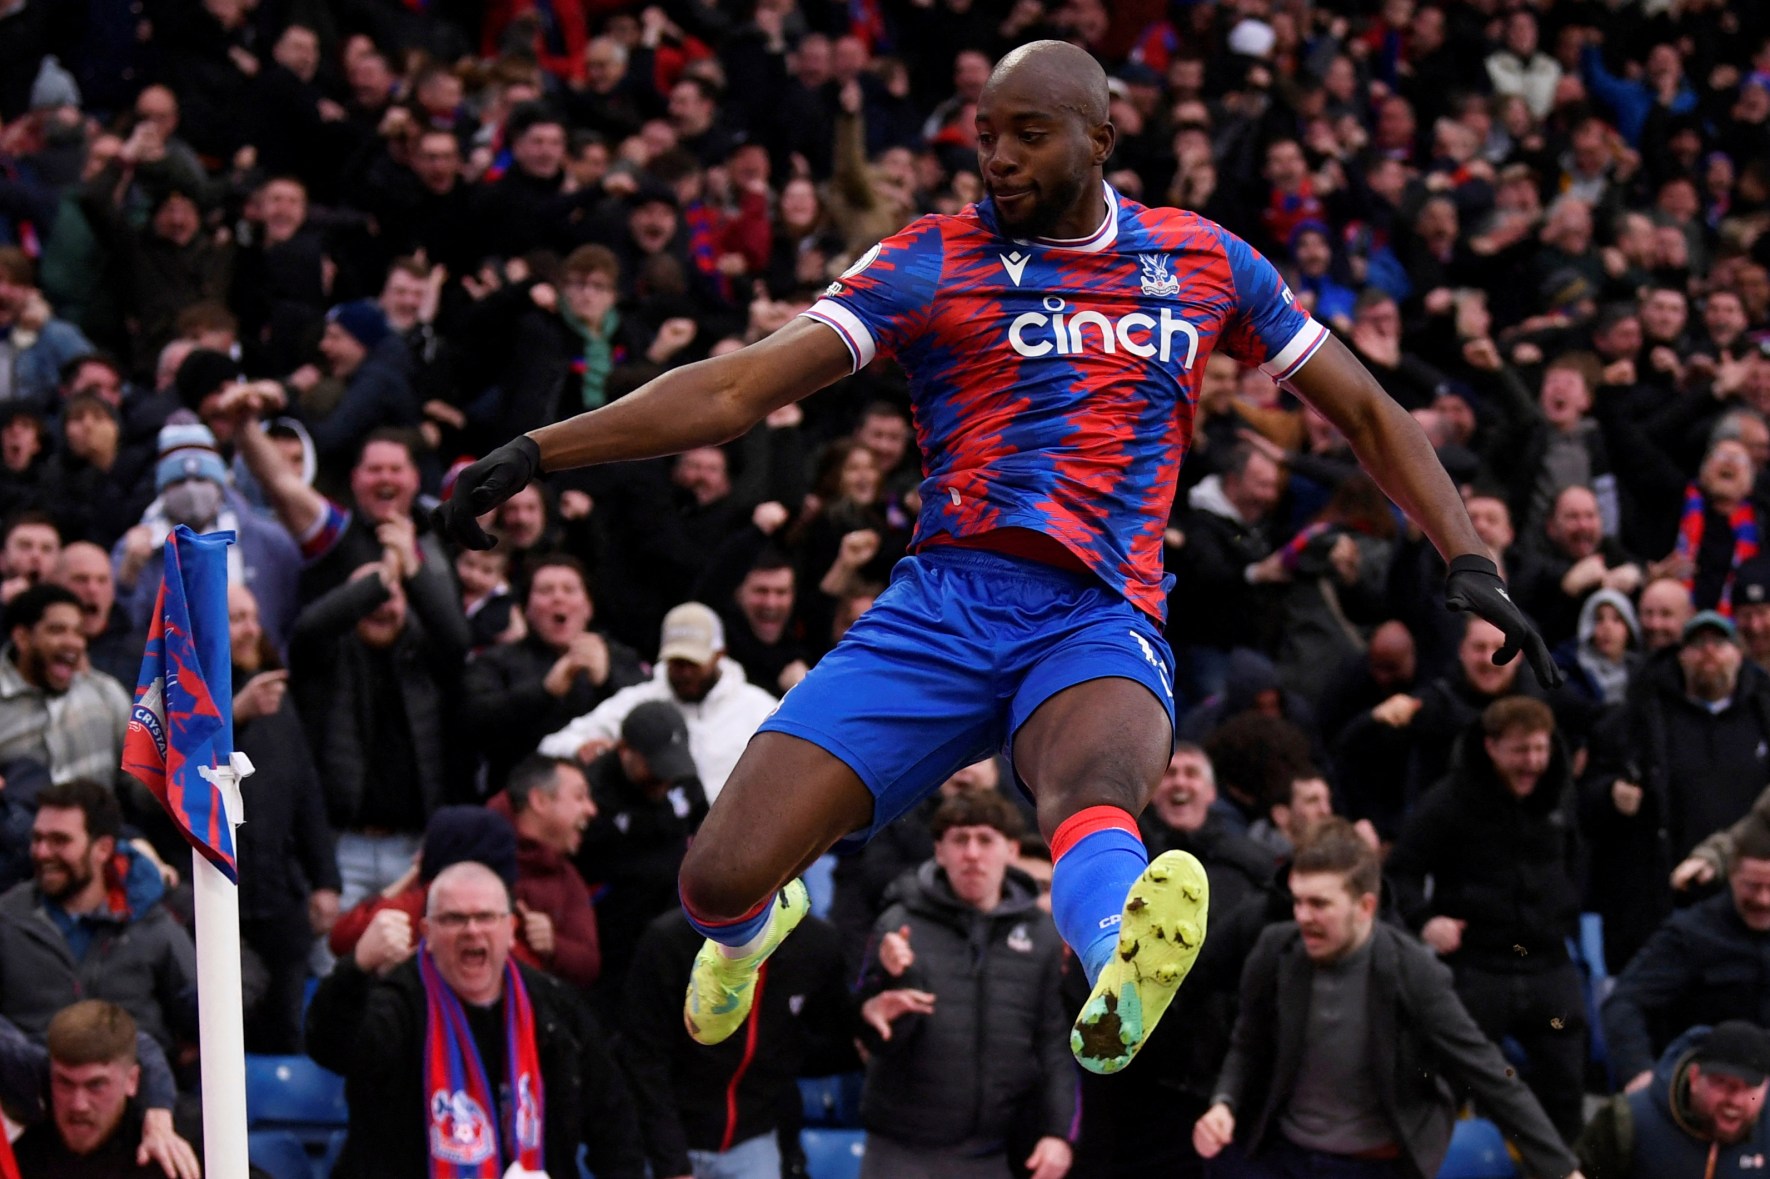 Mateta’s late winner for Palace on Saturday signalled the end of Rodgers at Leicester